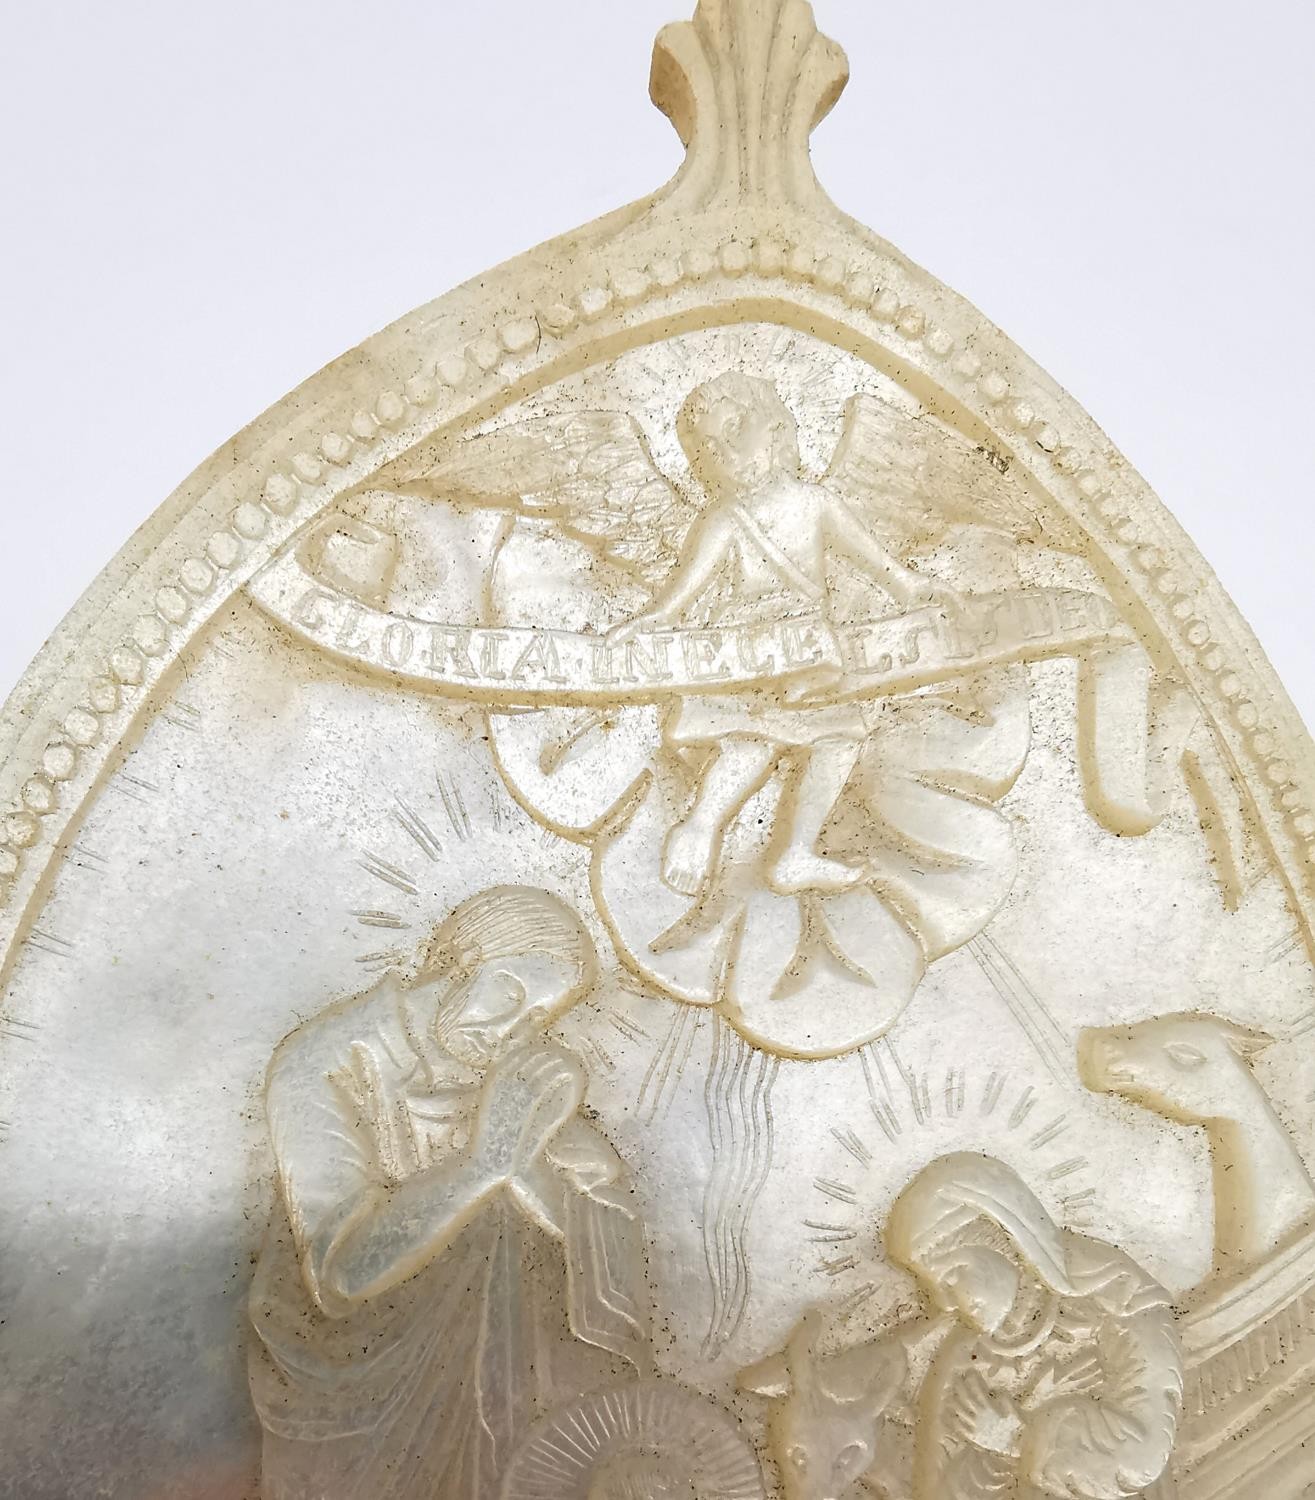 Two 19th century carved mother of pearl religious medallions depicting The Annunciation, Holy Land - Image 11 of 11